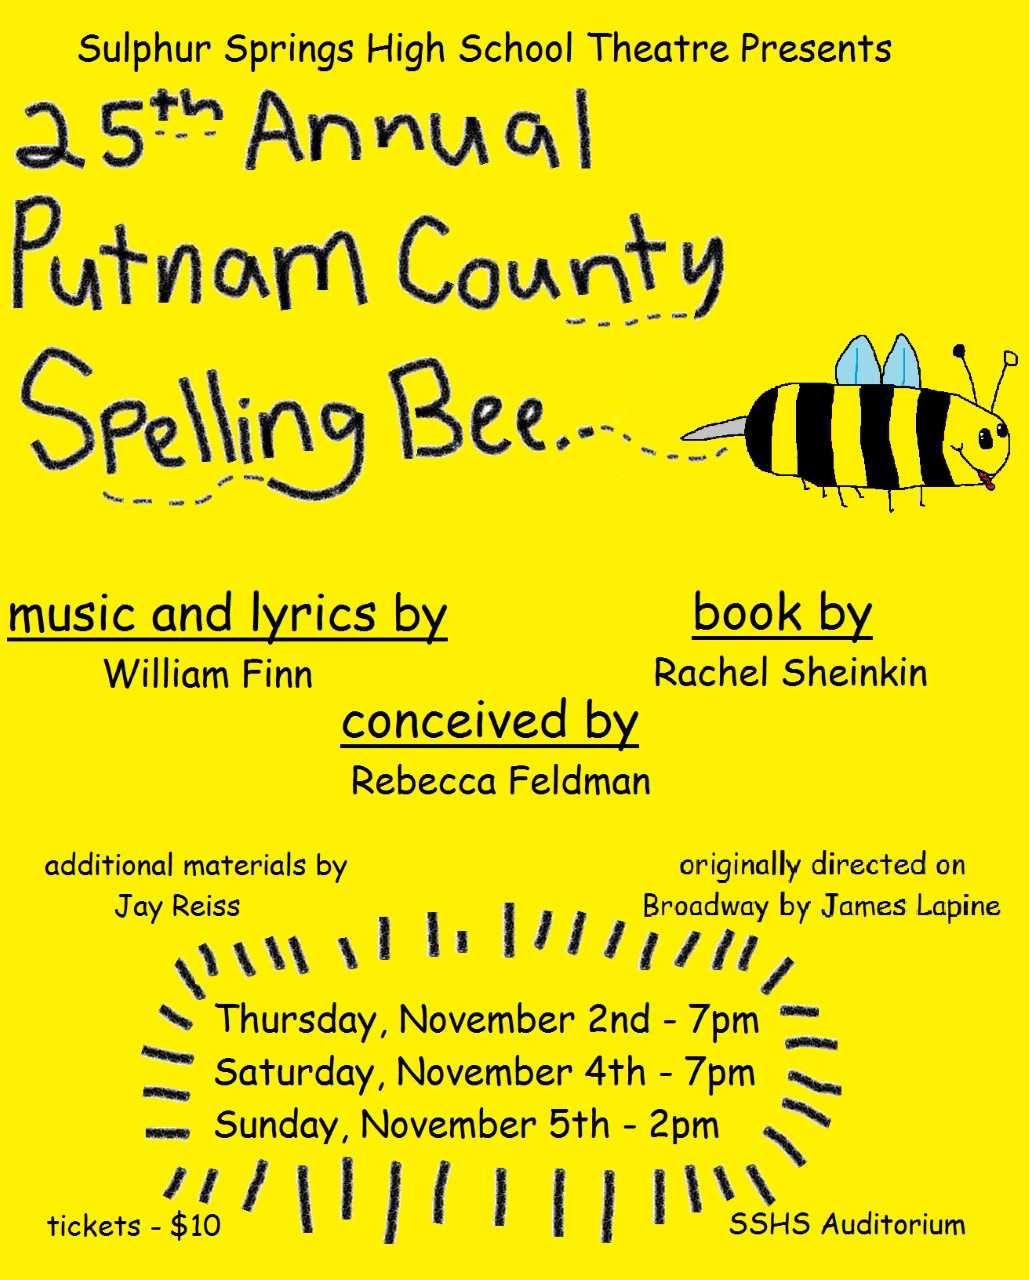 Sulphur Springs High School Theatre presents 25th Annual Putnam County Spelling Bee November 2nd, 4th, and 5th